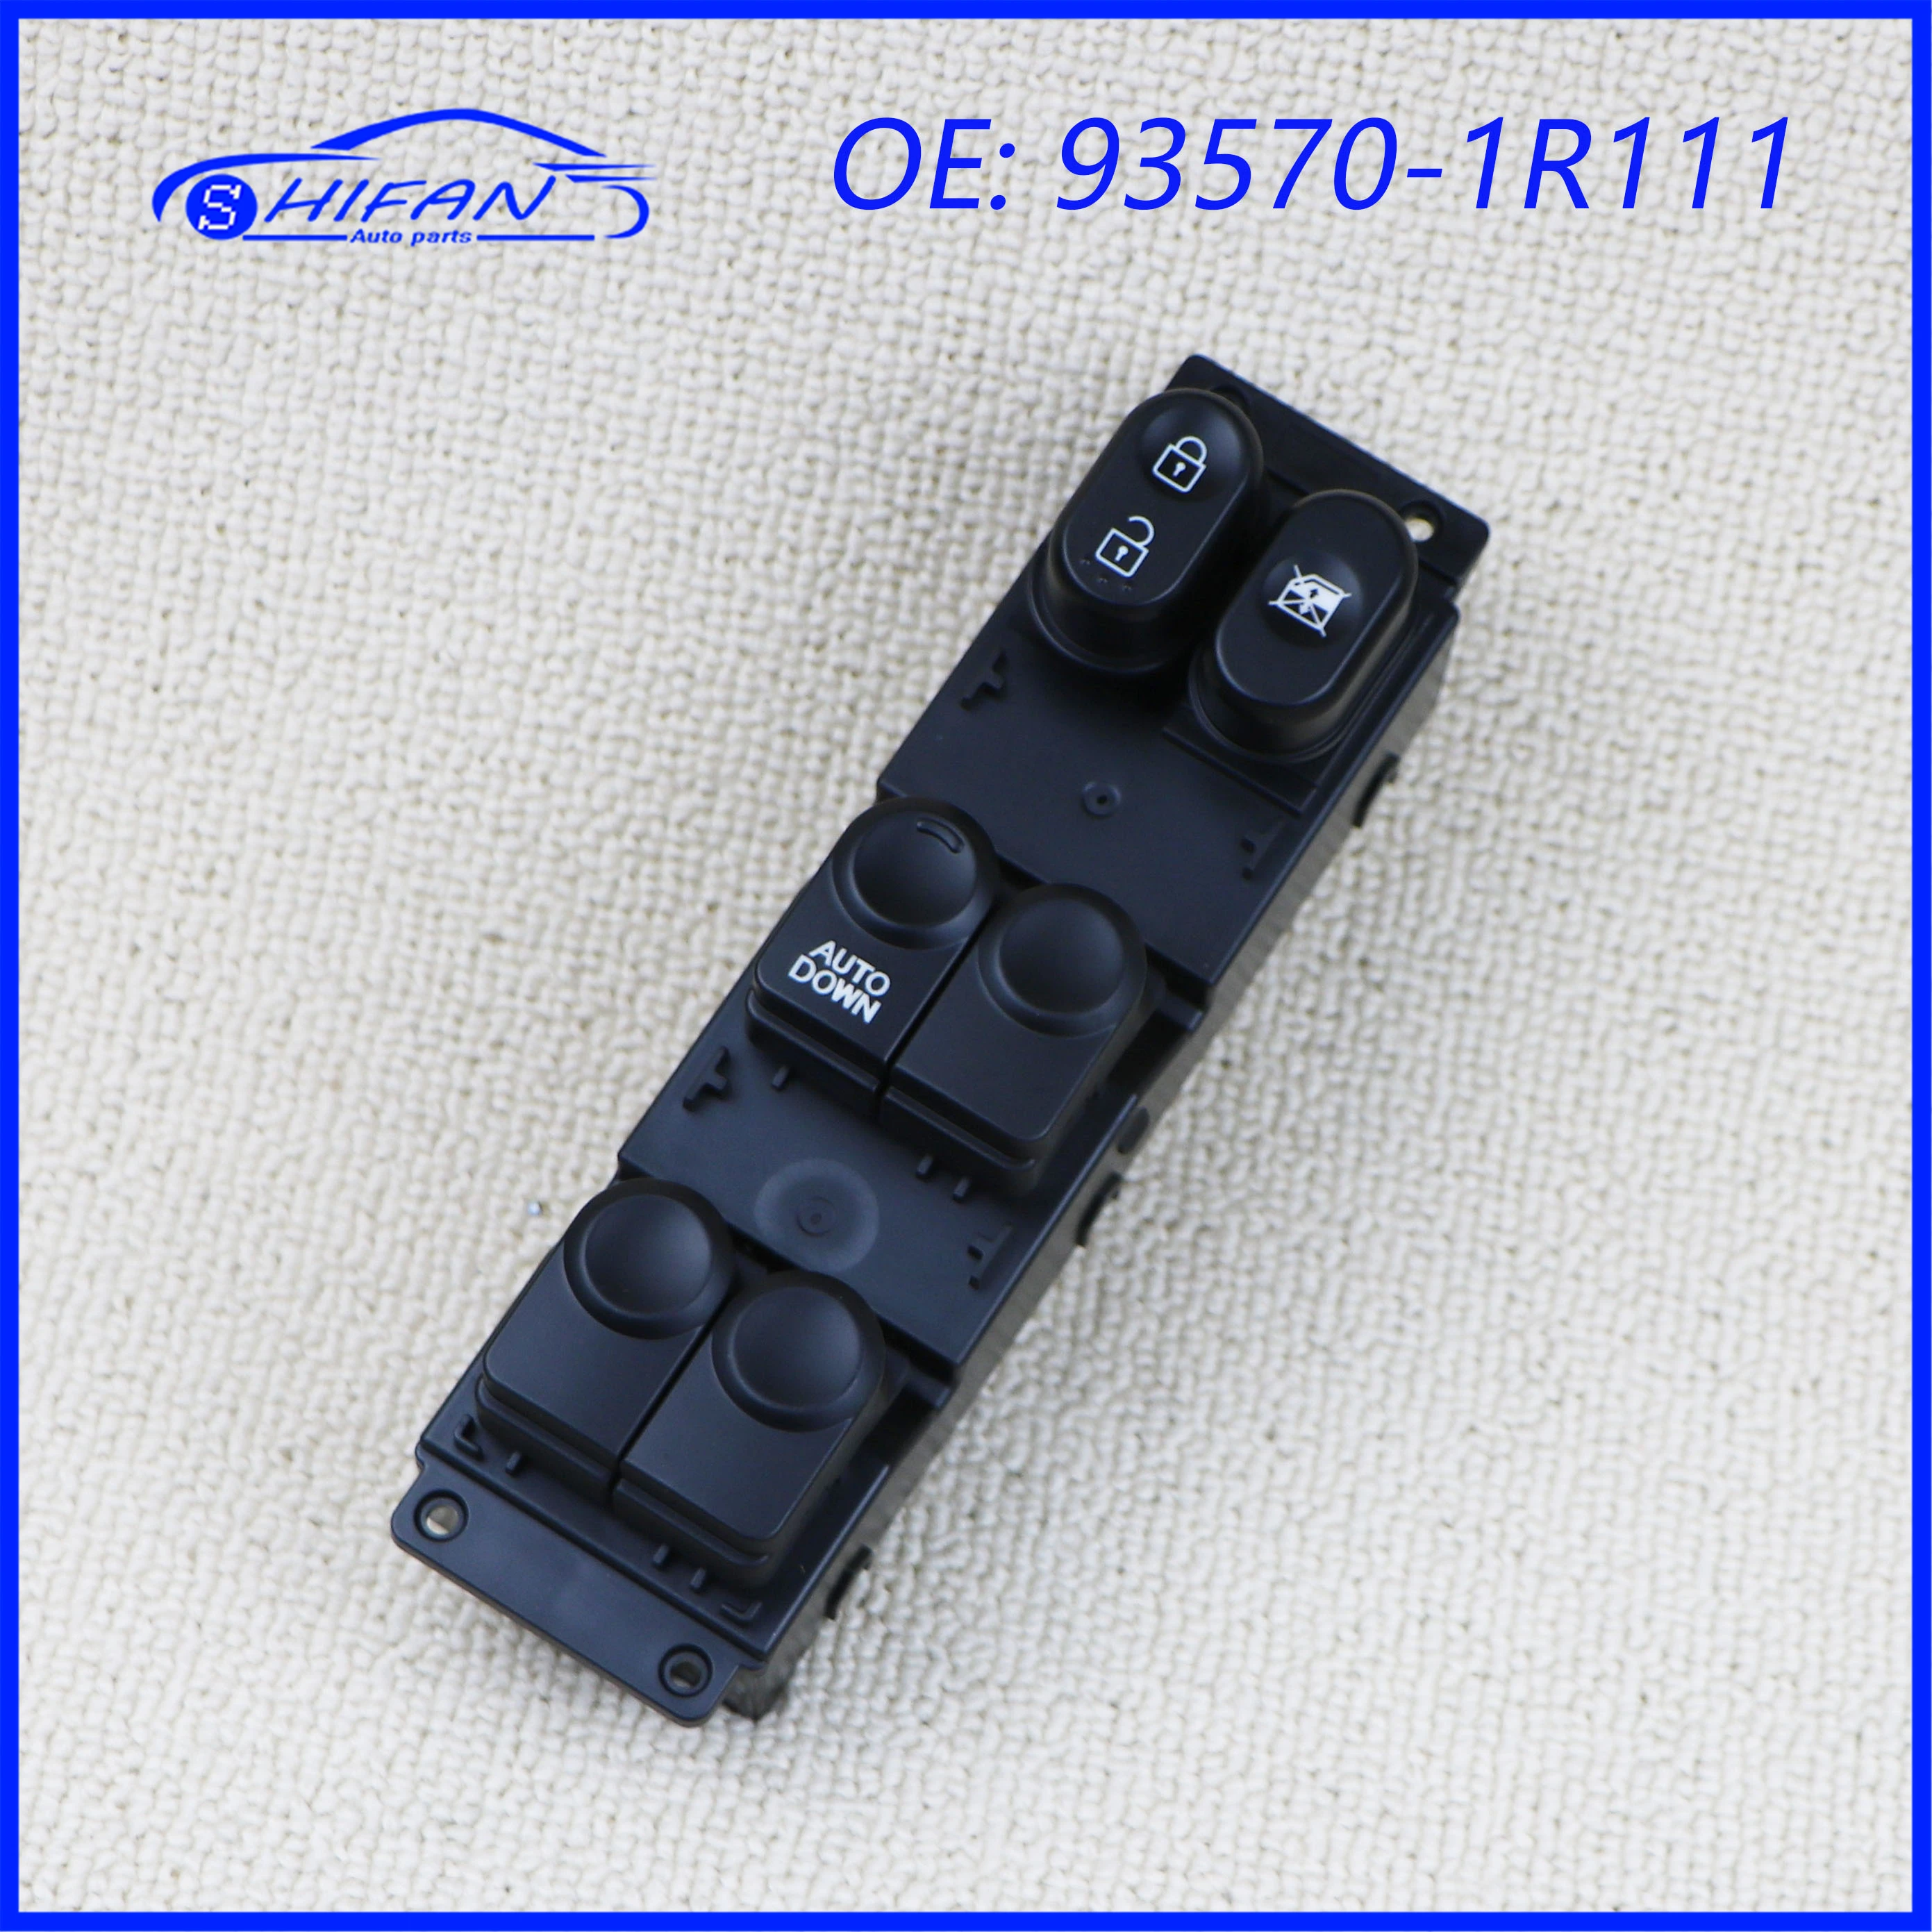 93570-1R111 Car Power Window Control Switch Electric Switch For Hyundai Accent 2010-2017 Car Accessories 935701R111 abs for renault alaskan accessories 2016 2017 2018 car styling door window glass lift control switch panel cover trim sticker